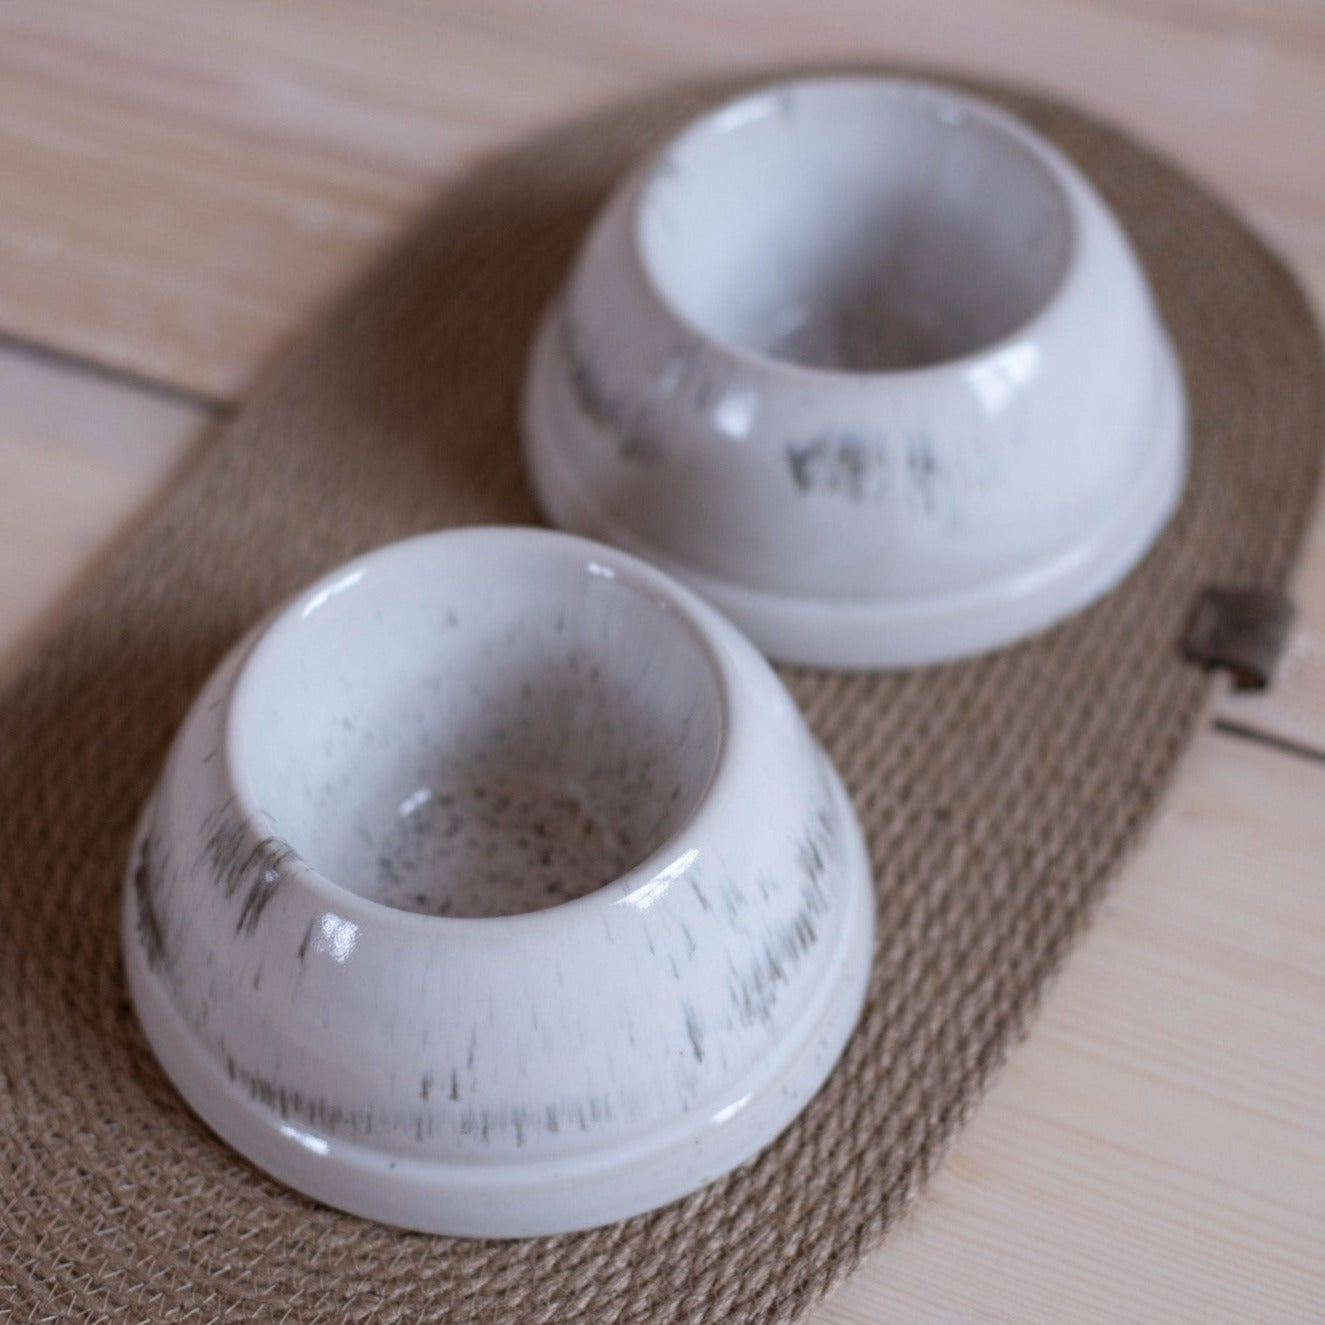 Handcrafted white ceramic dog bowls with jute mat for spaniels. Set includes 2 medium-sized bowls with a speckled glaze. 